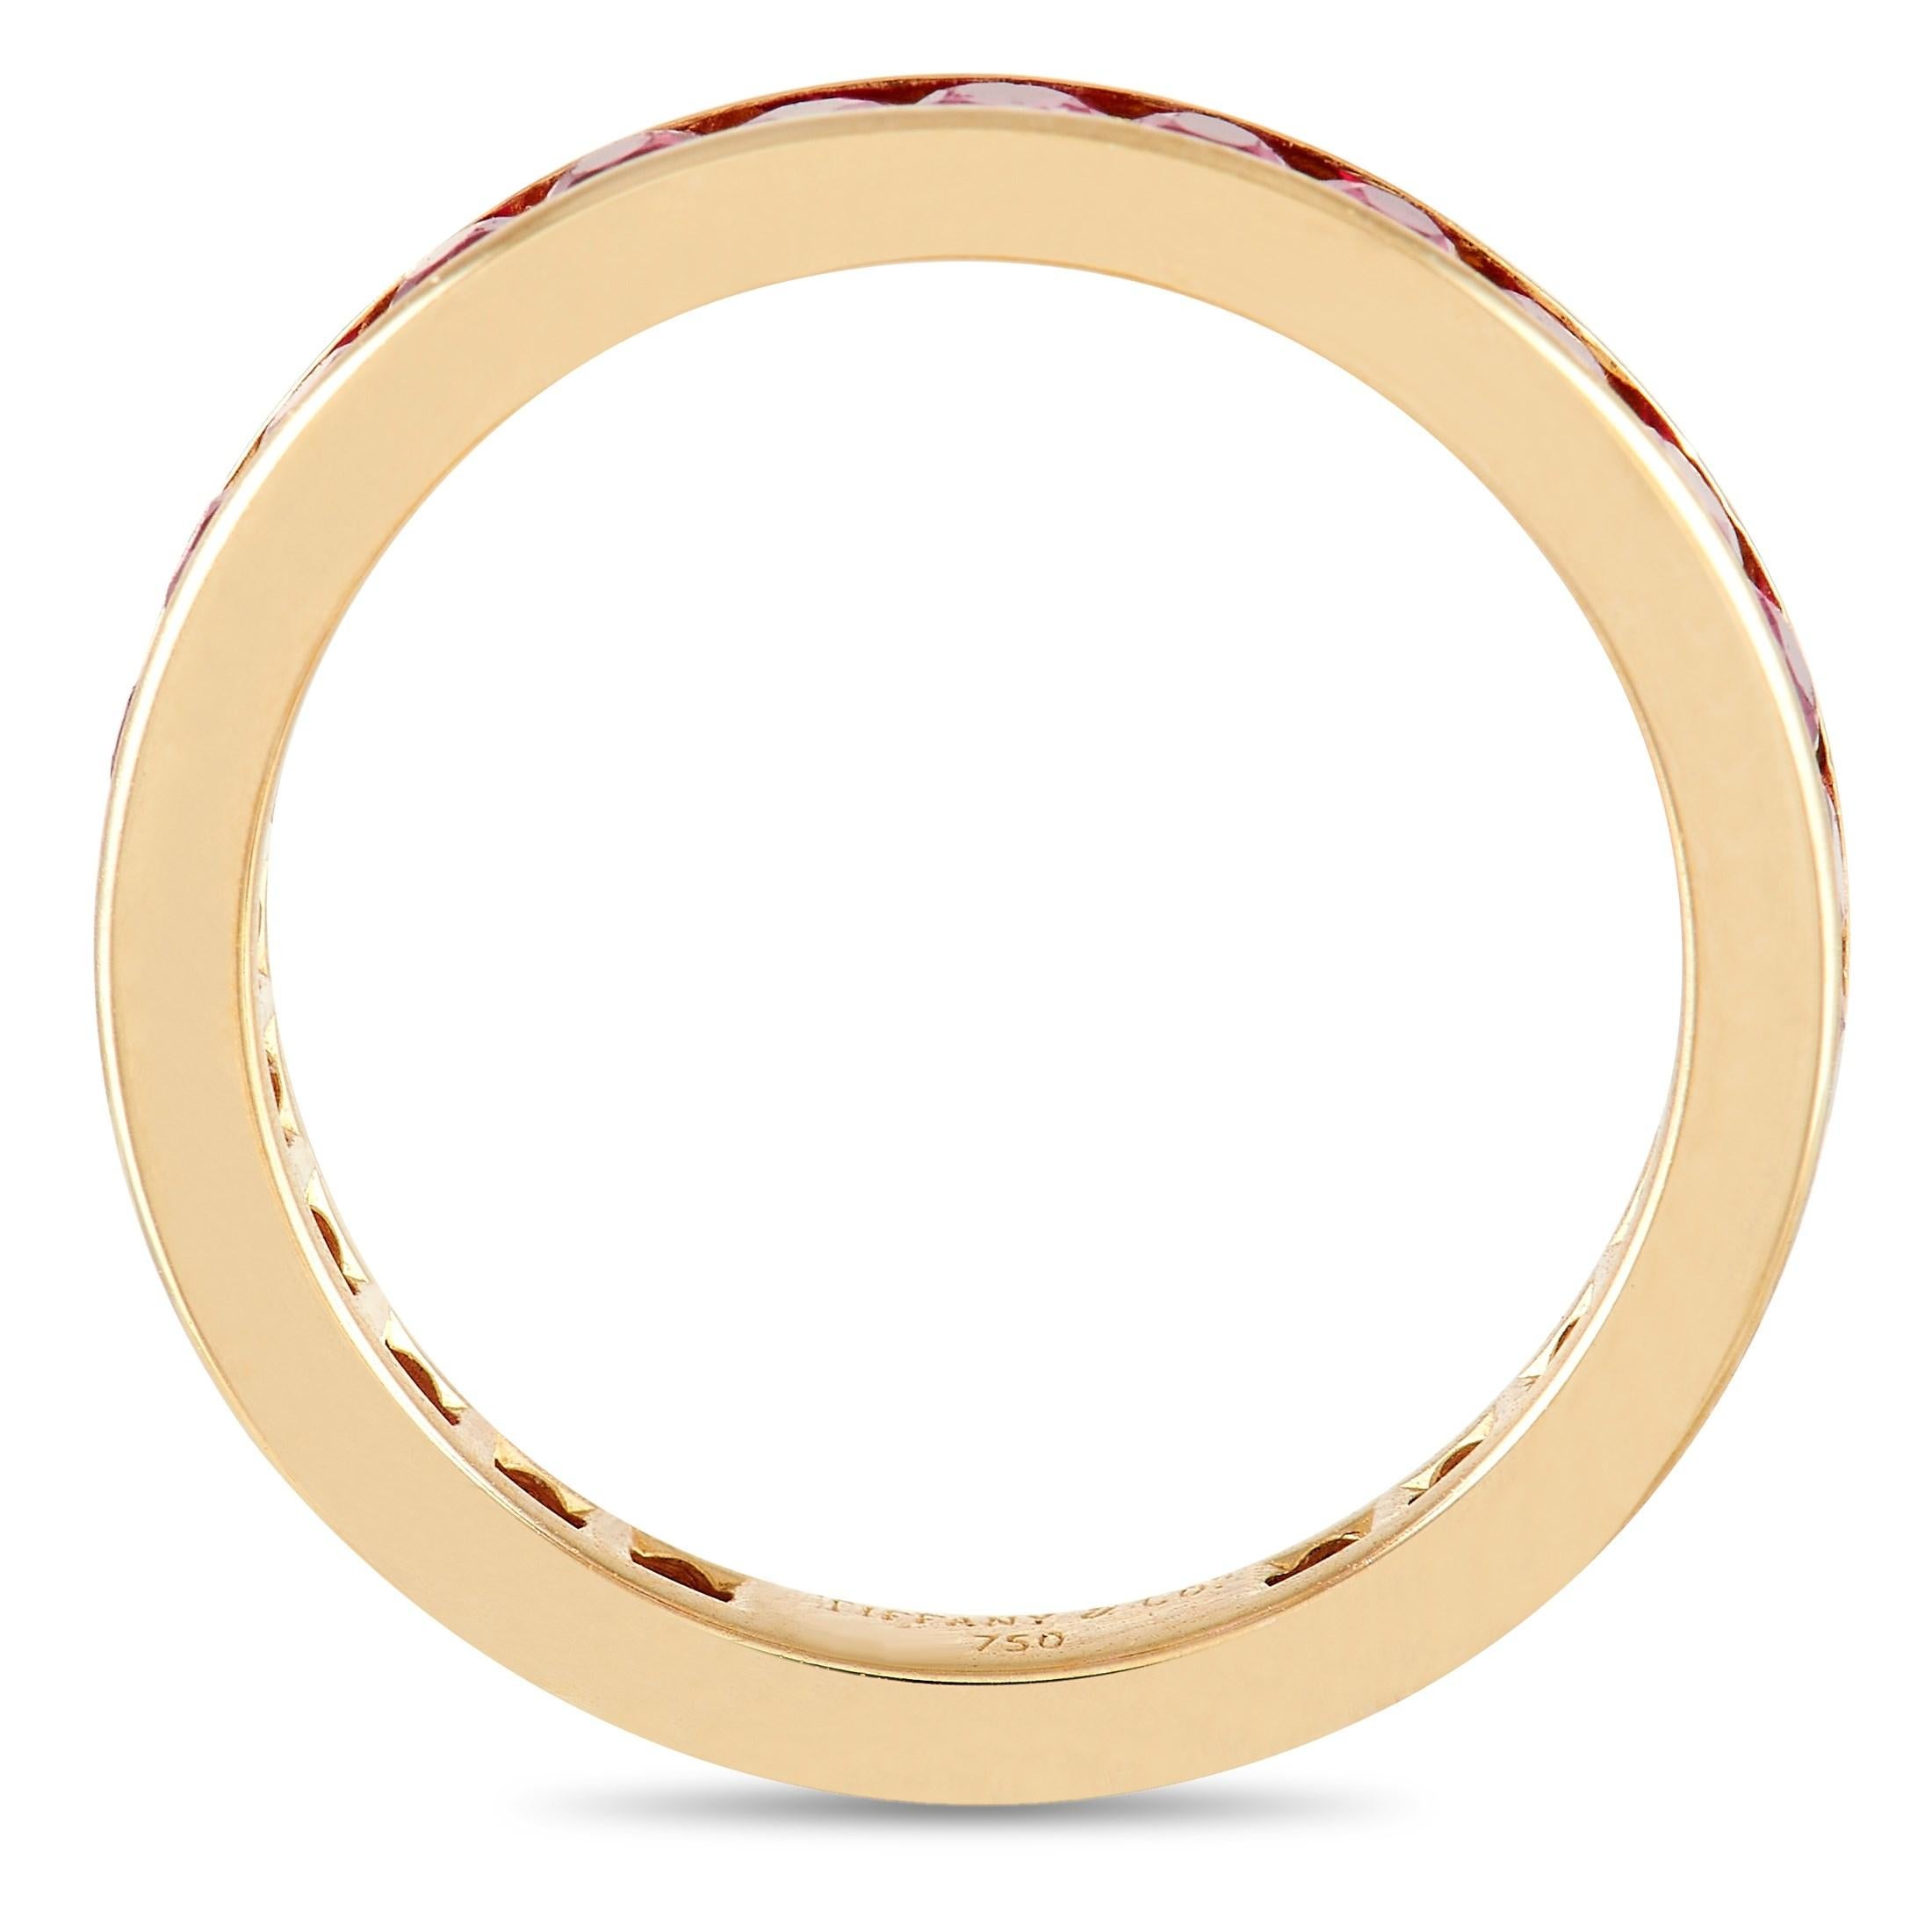 A series of round-cut rubies adorn the entirety of this sleek, sophisticated Tiffany & Co. ring. The 18K Yellow Gold setting features a 2mm wide band and a 1mm top height, making it a comfortable piece that is ideal for everyday wear. 